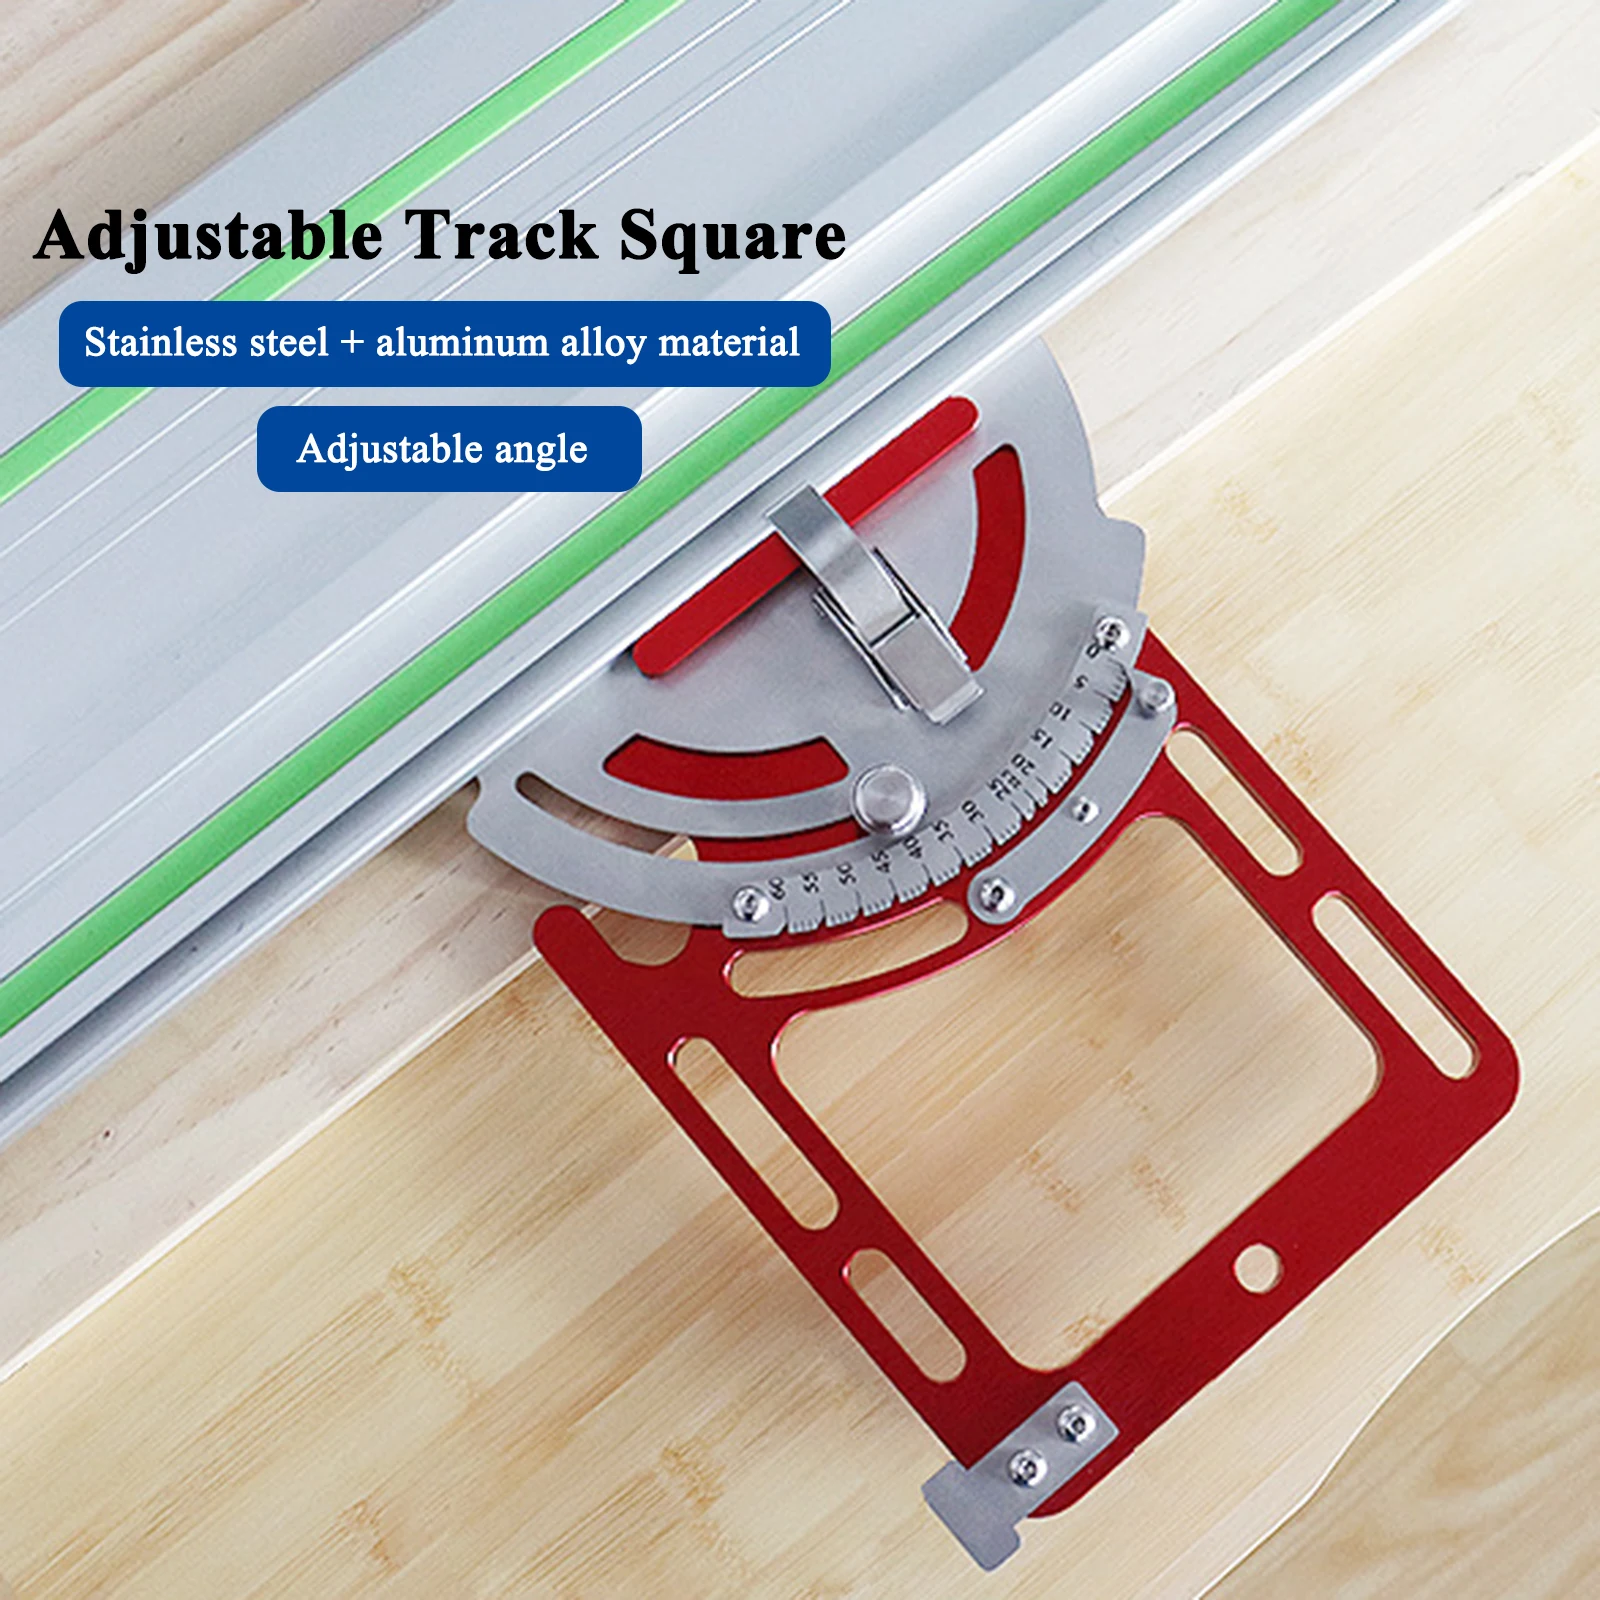 Rail Clamp Adjustable Angle Circular Saw Guide Woodworking Hand Tool Accessories Stainless Steel Compatible Rail Opening Aid enlarge